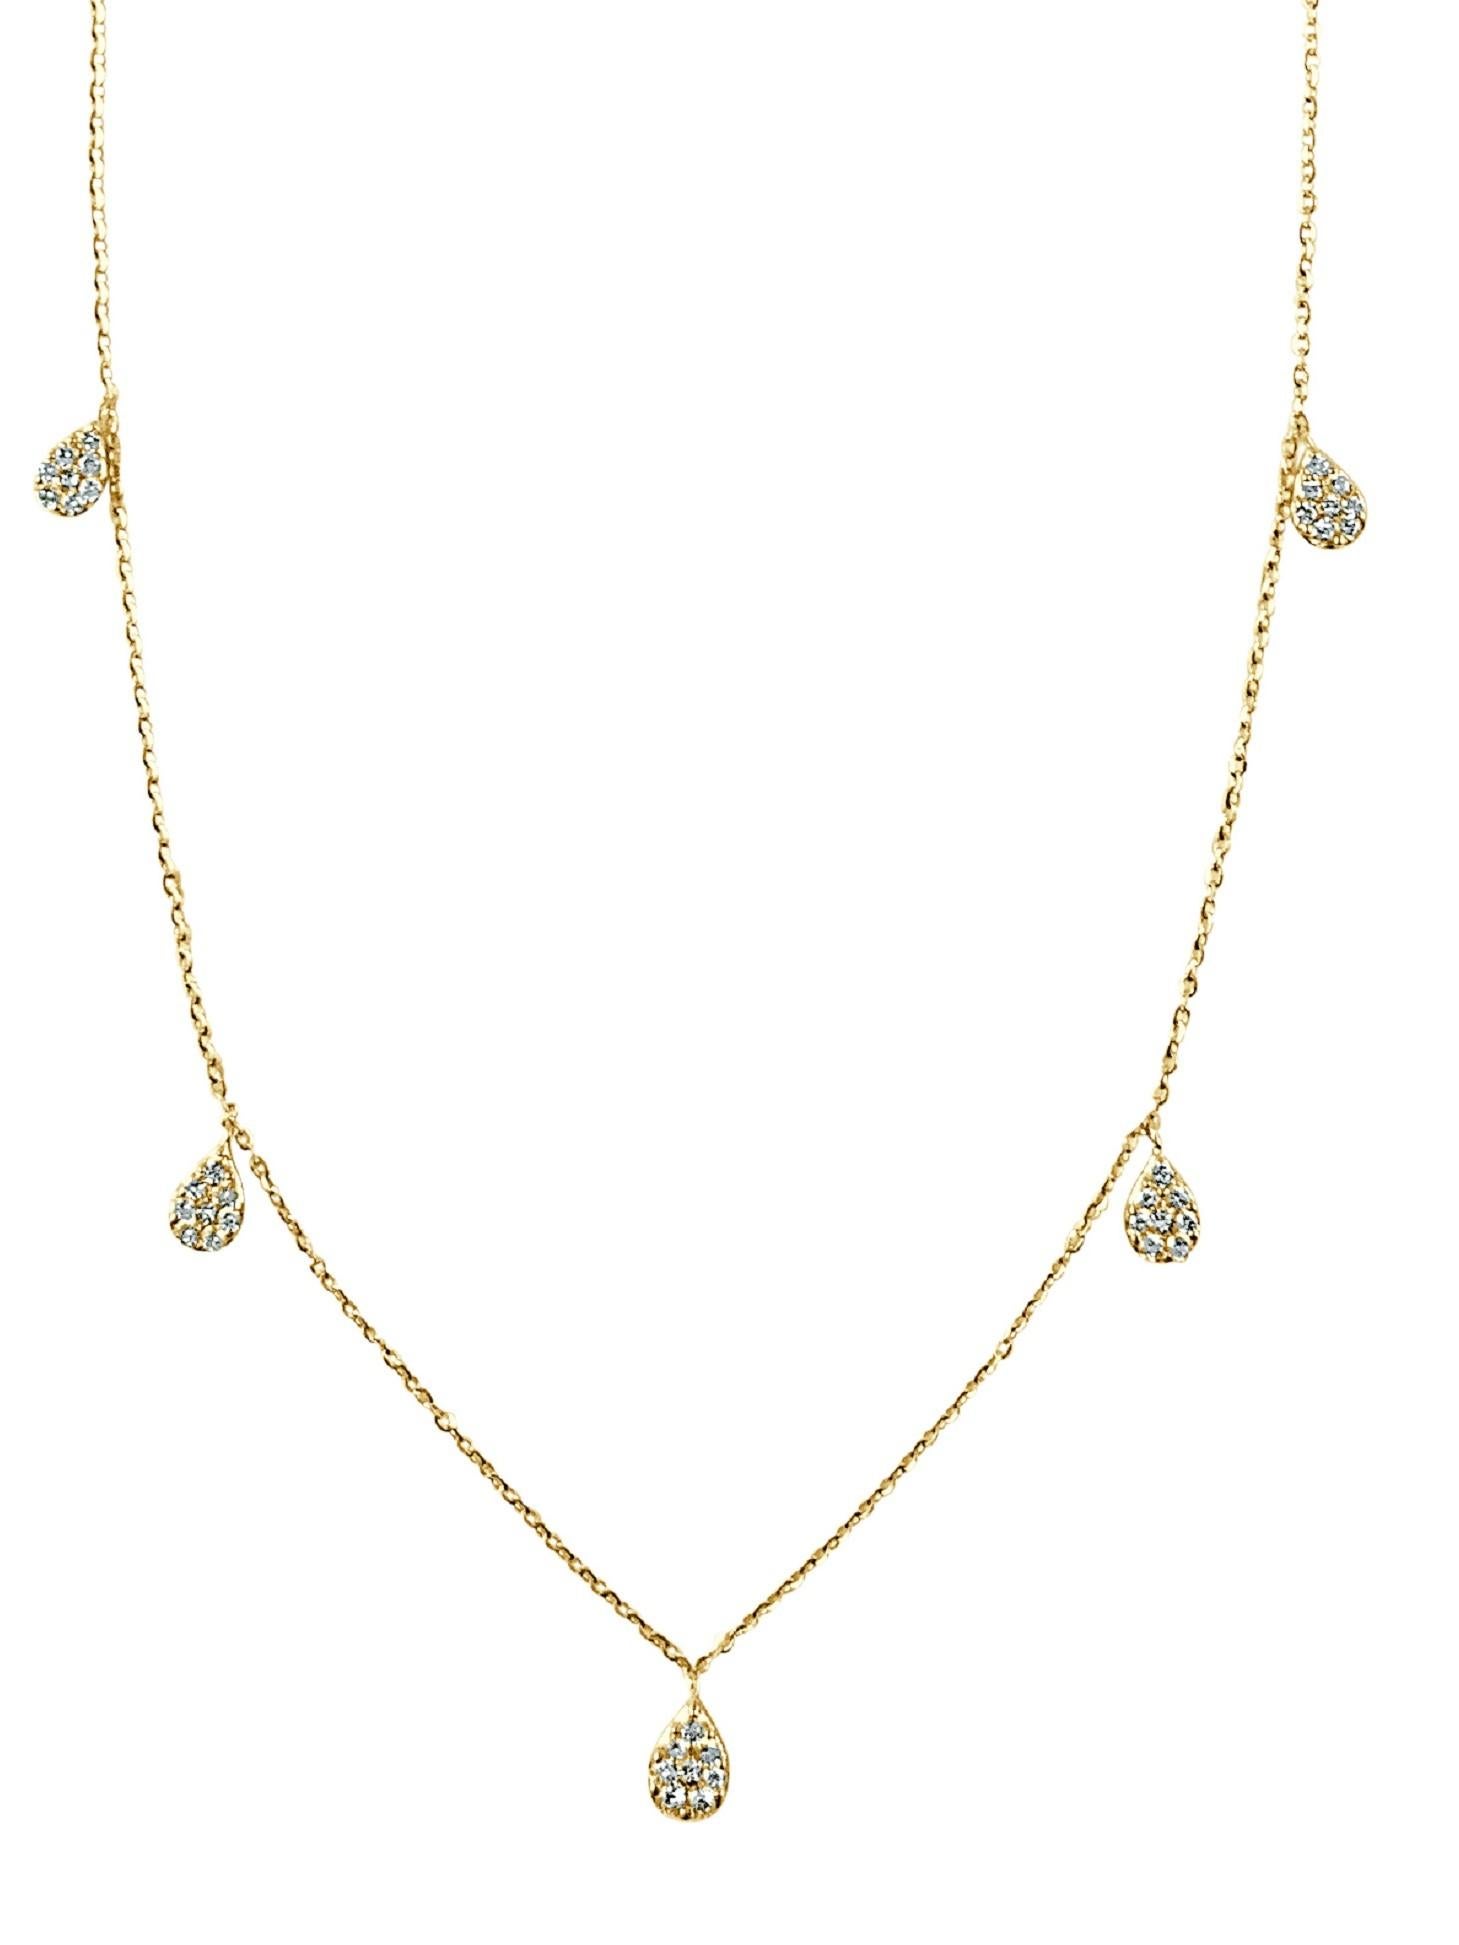 Contemporary 14K Yellow Gold 0.50ct Diamond Station Necklace for Her For Sale